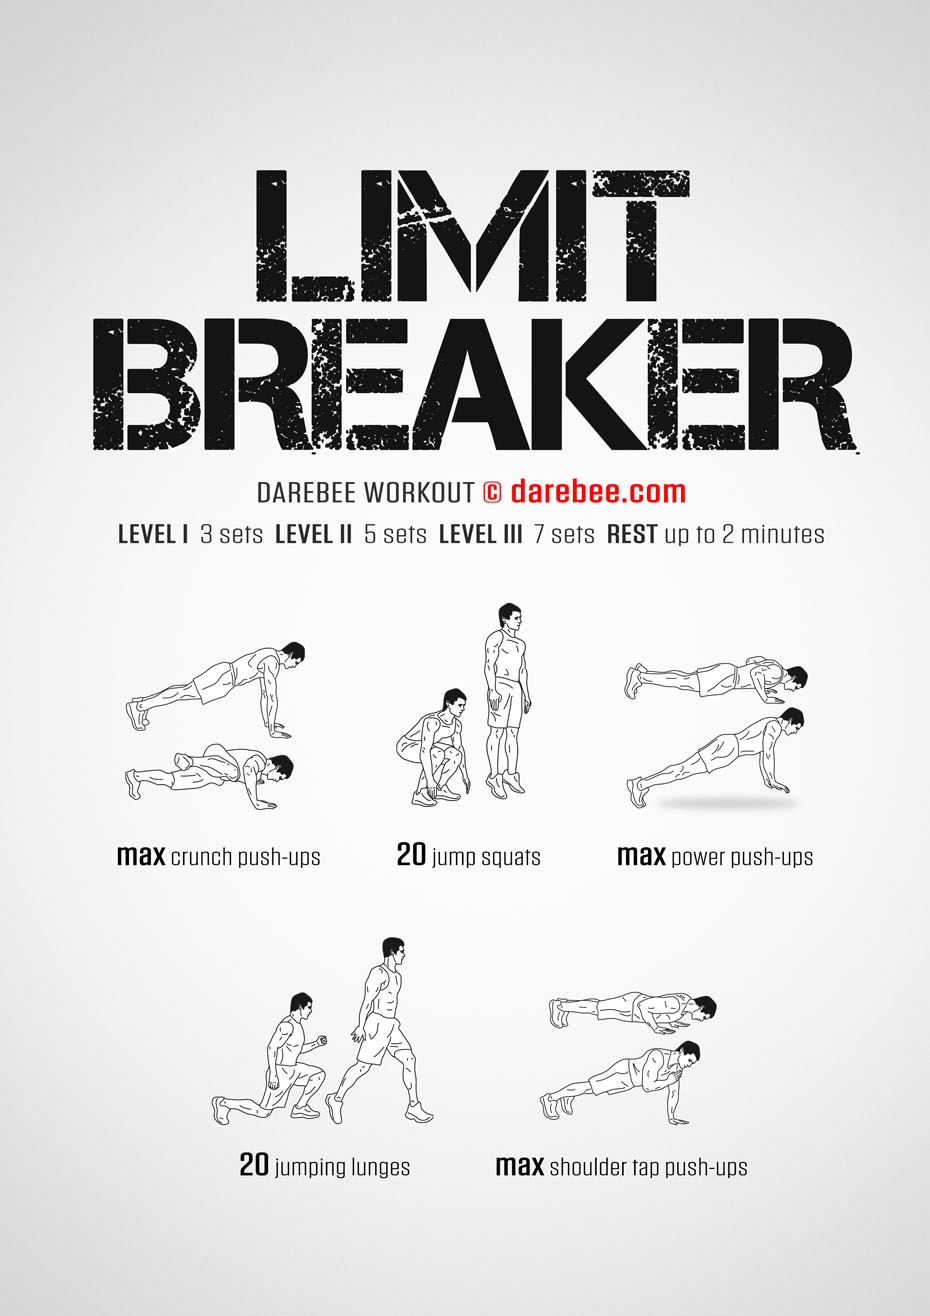 Limit Breaker is a difficulty Level IV Darebee home-fitness workout which makes it great for building strength without any equipment but not suitable for those just starting out or coming back to fitness after injury or a lay-off.